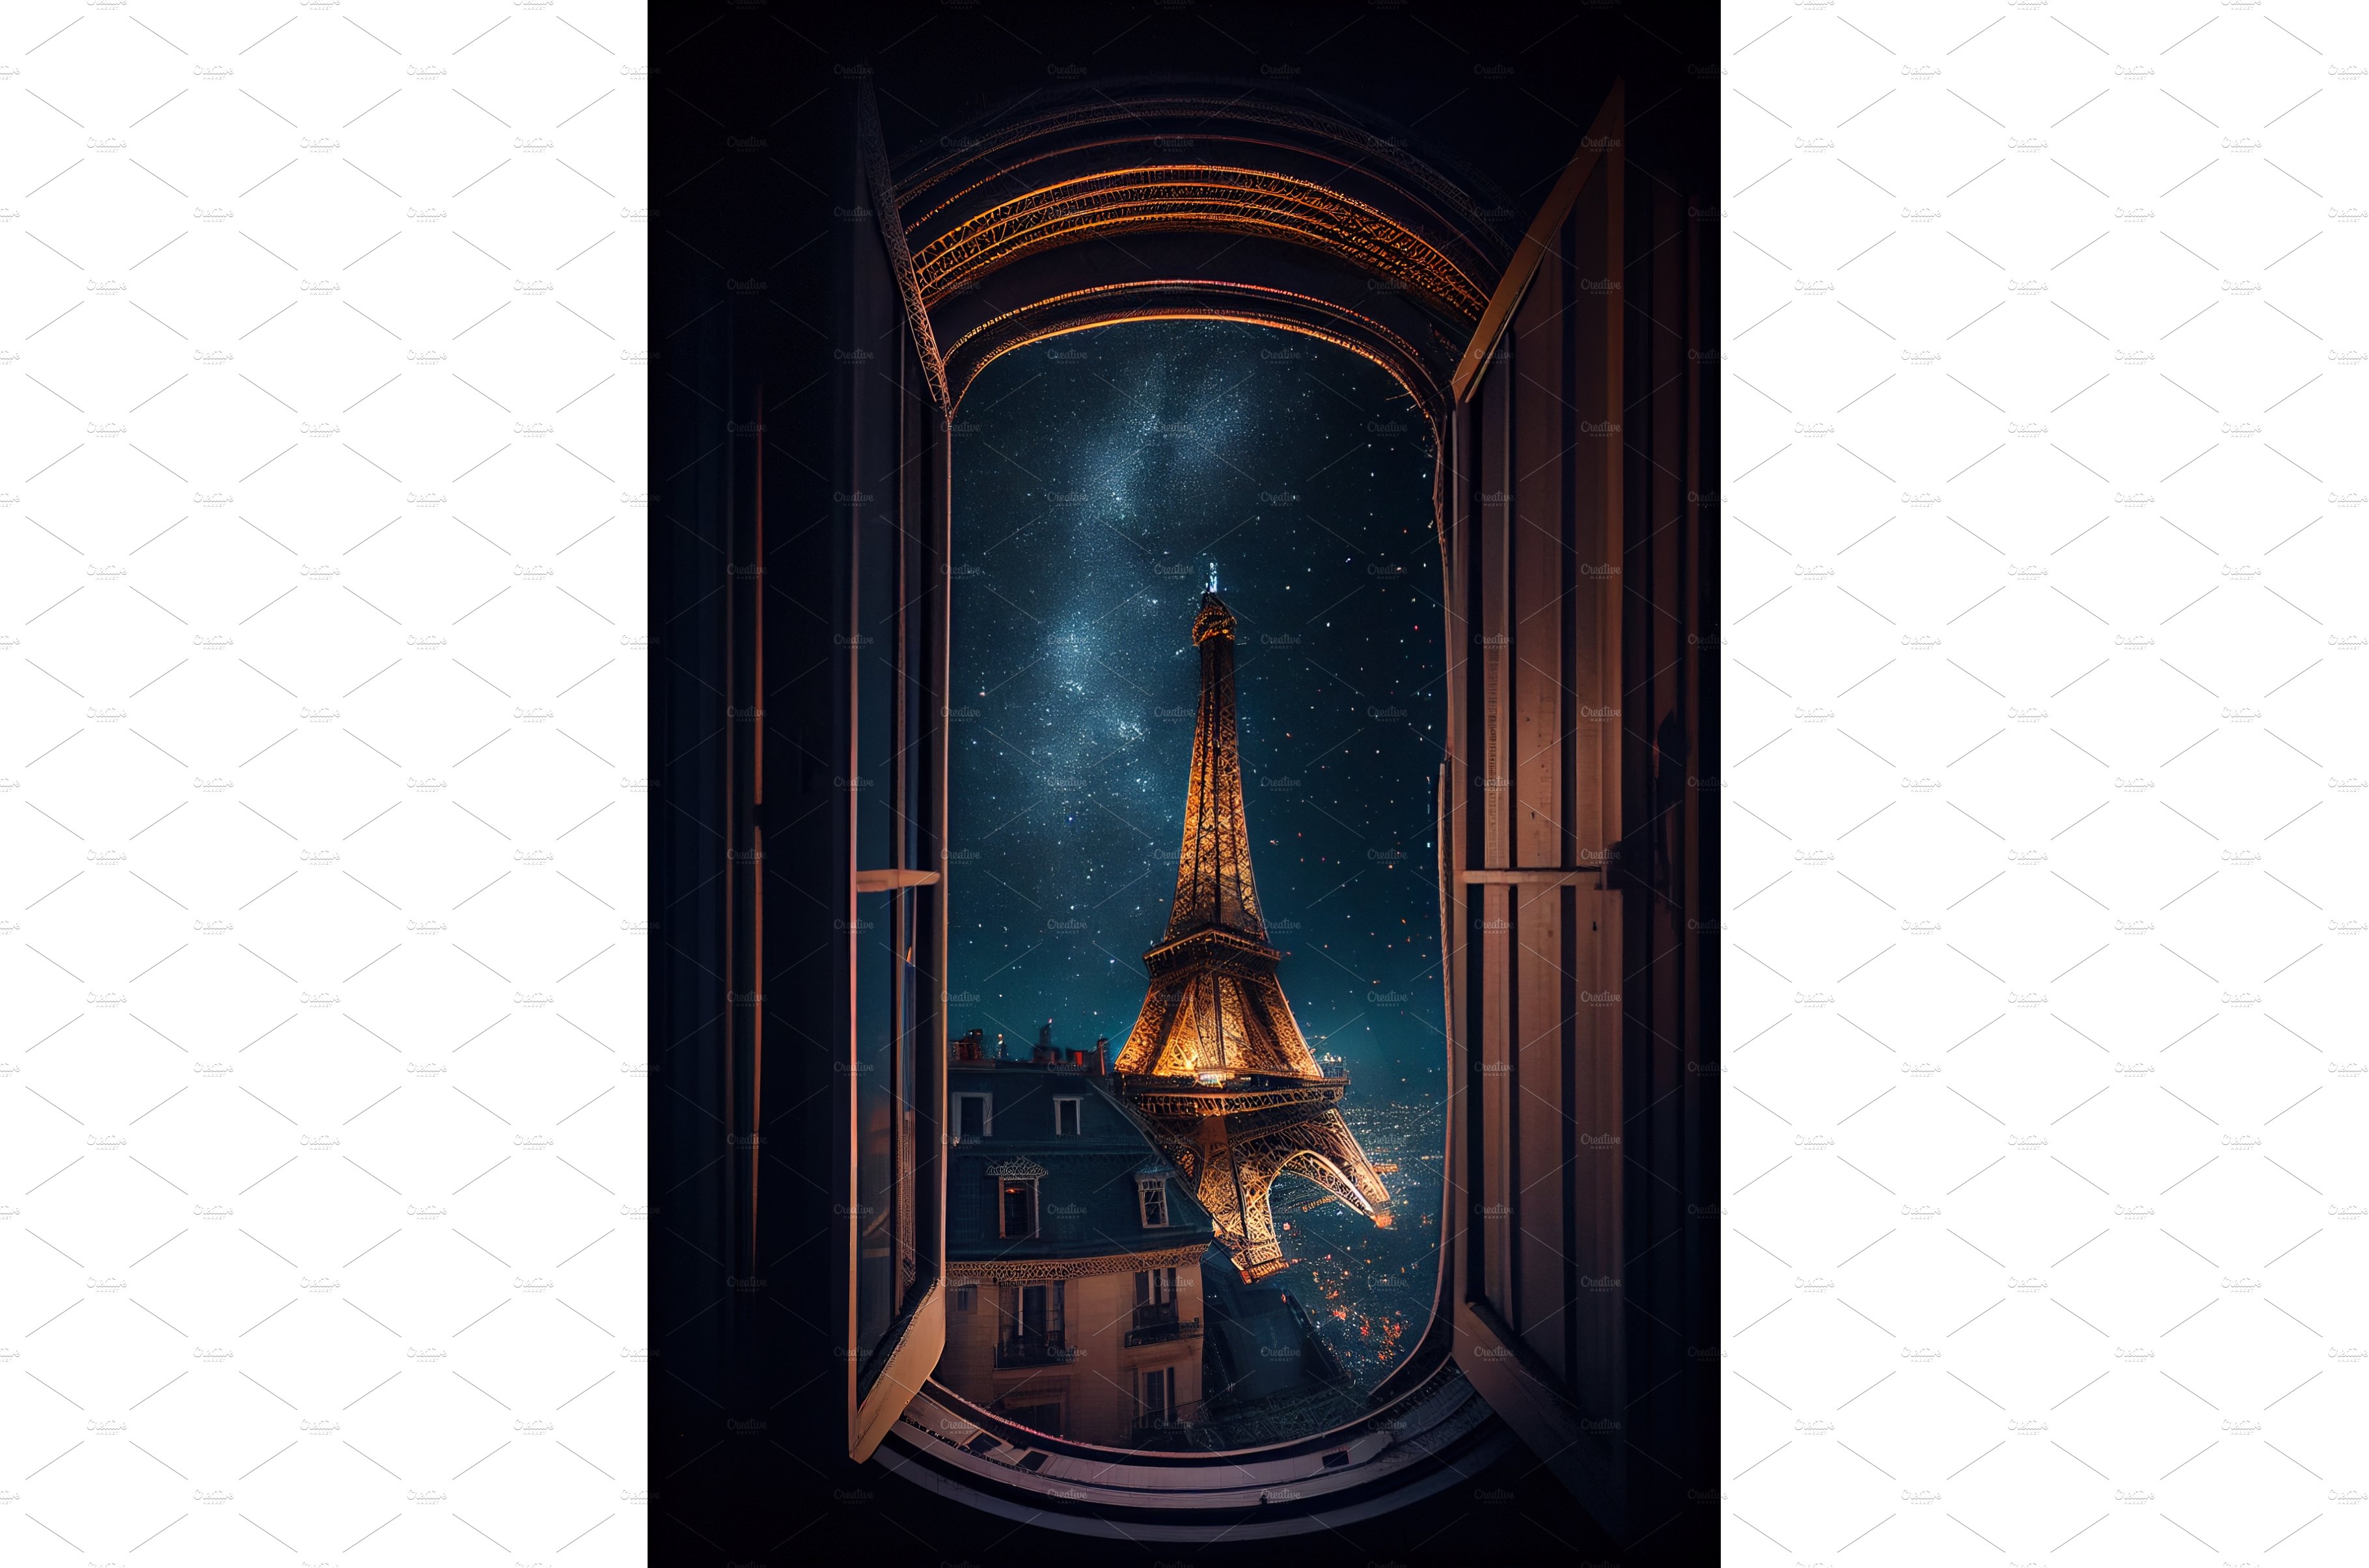 Room in Paris with eiffel tour in cover image.